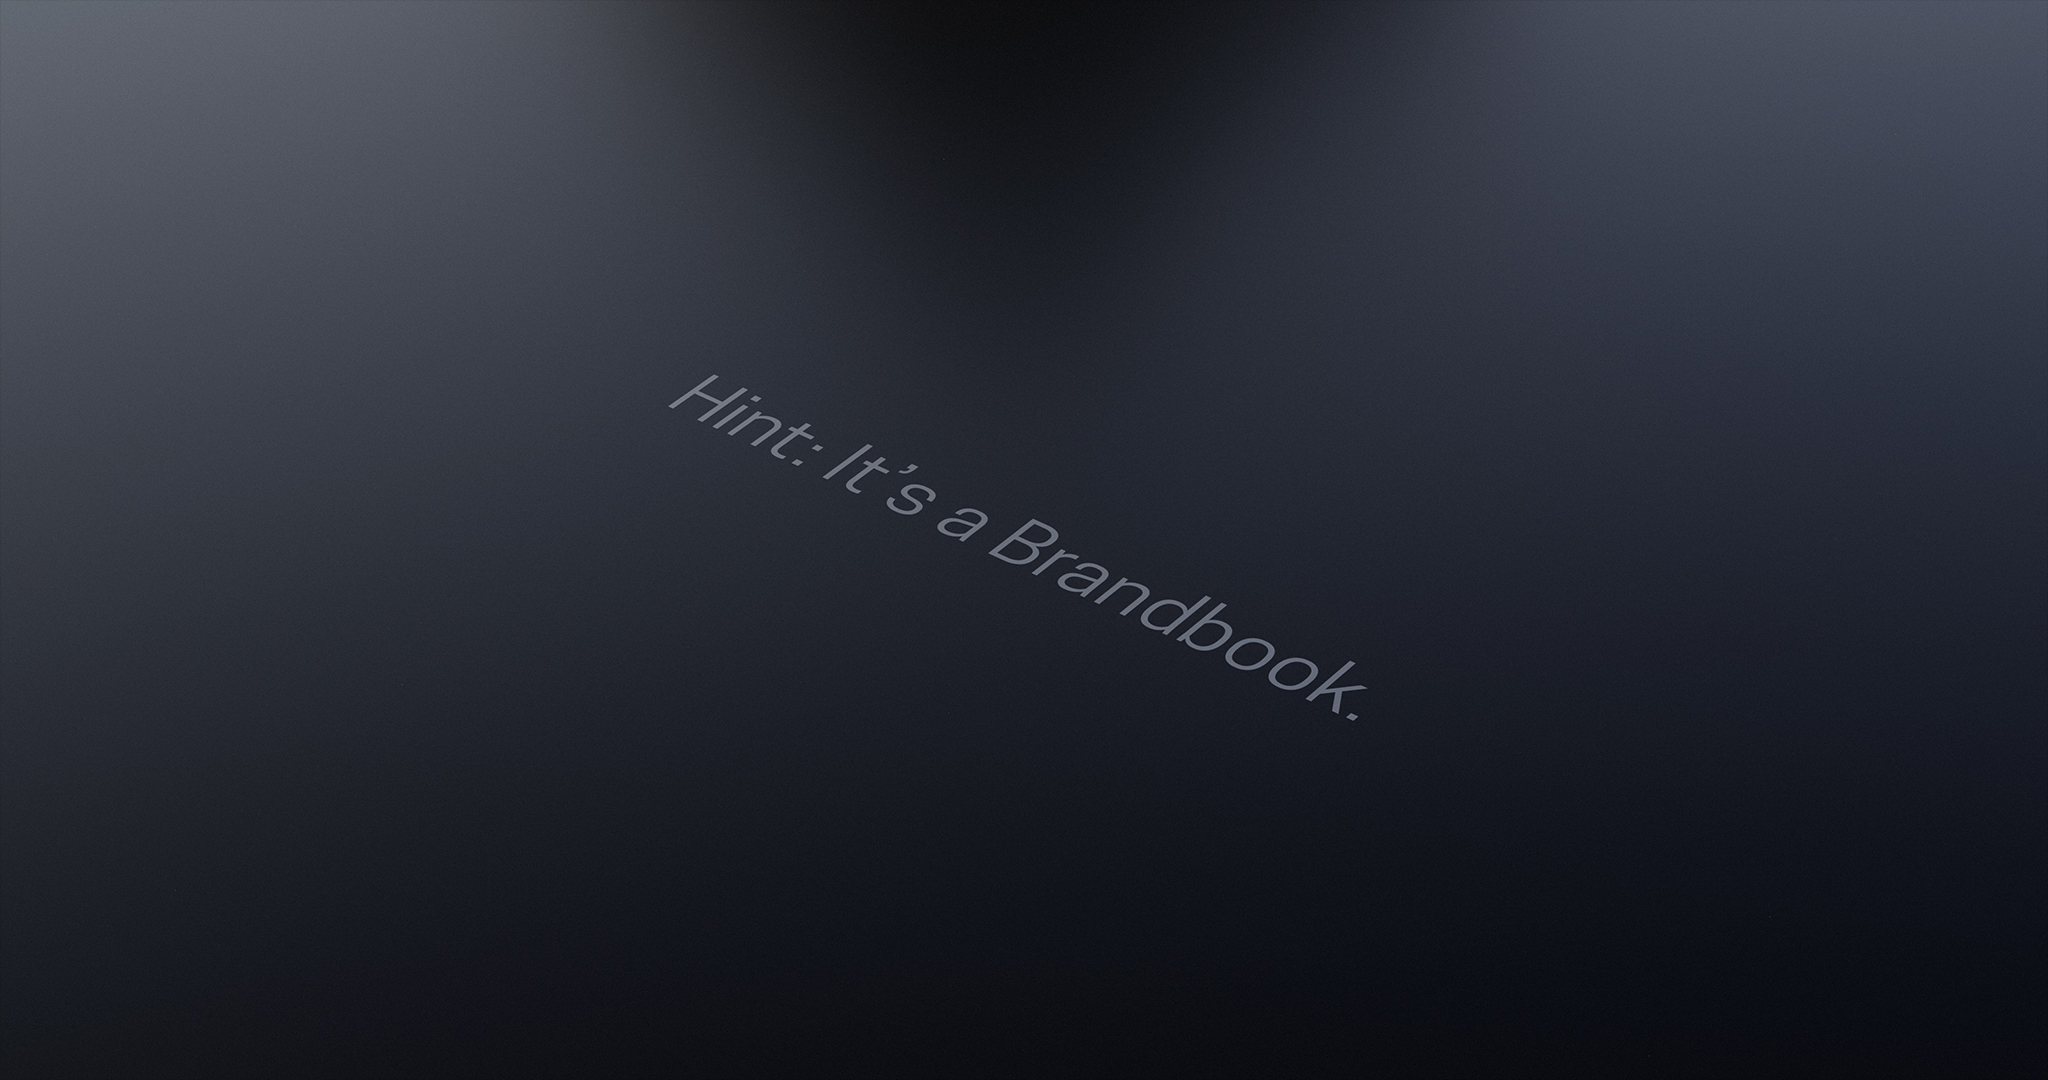 A dark, metallic surface with an engraving that reads: Hint: It’s a Brandbook.